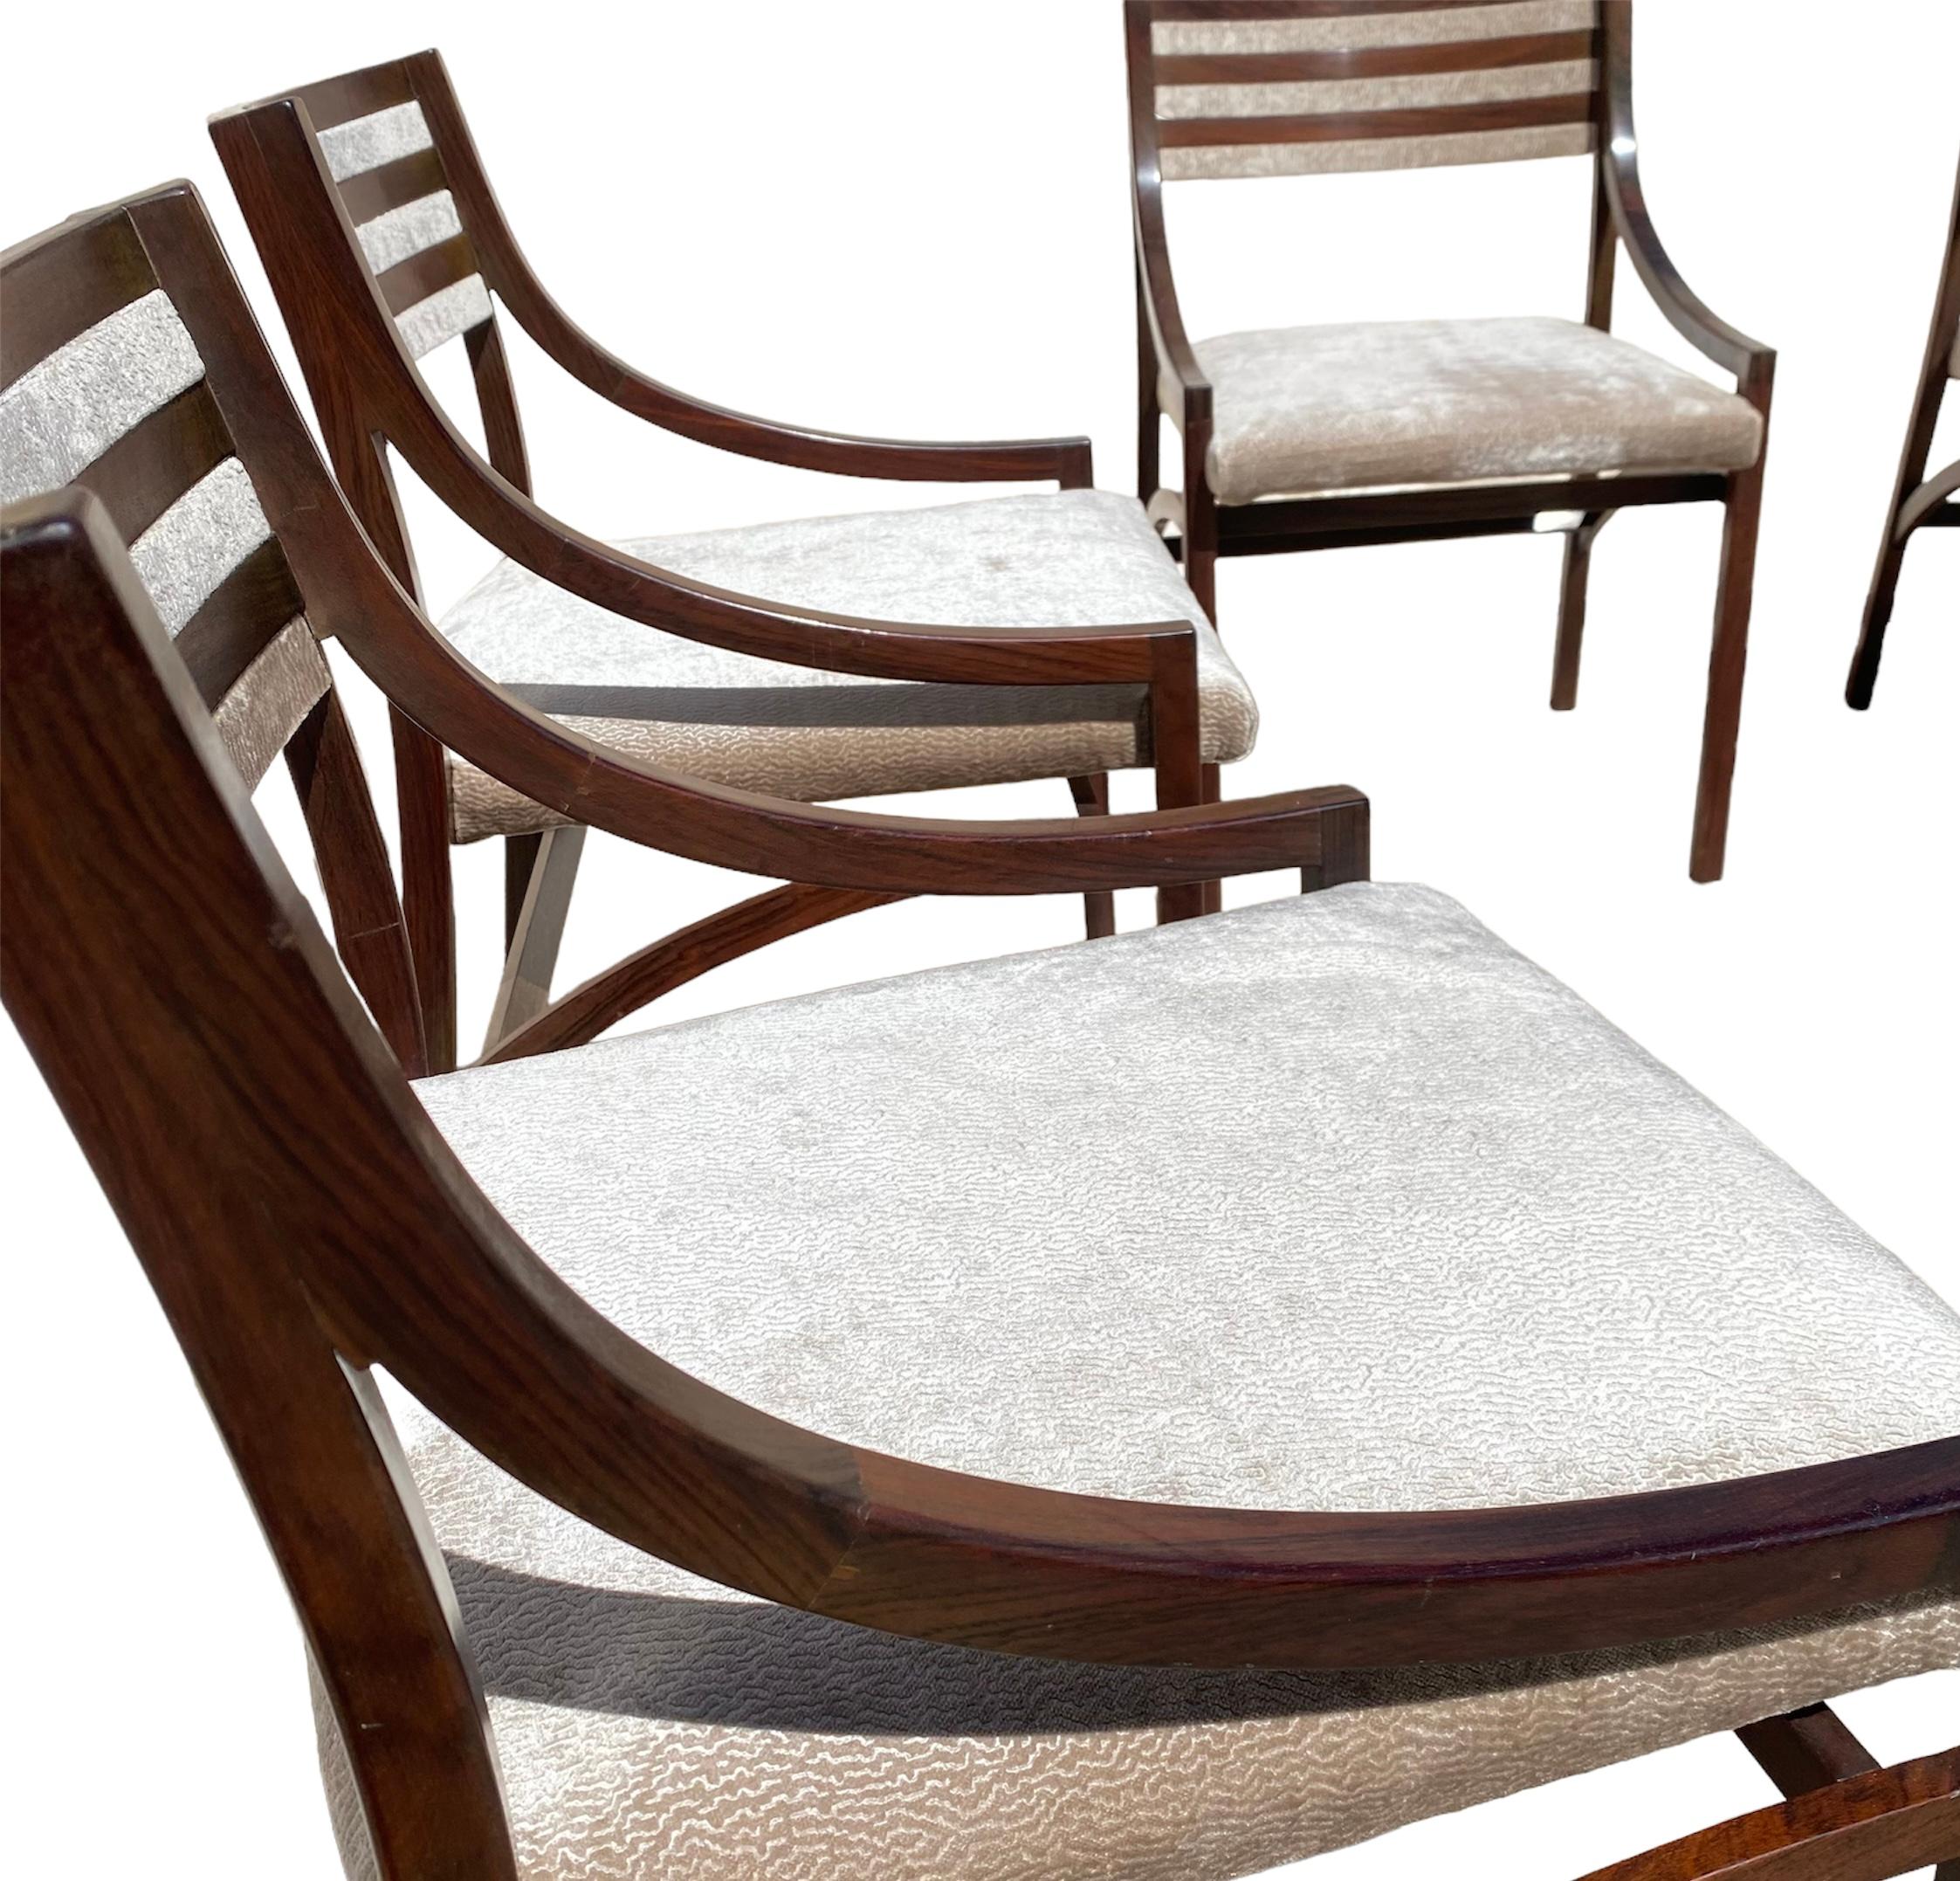 Set of 4 Chairs 